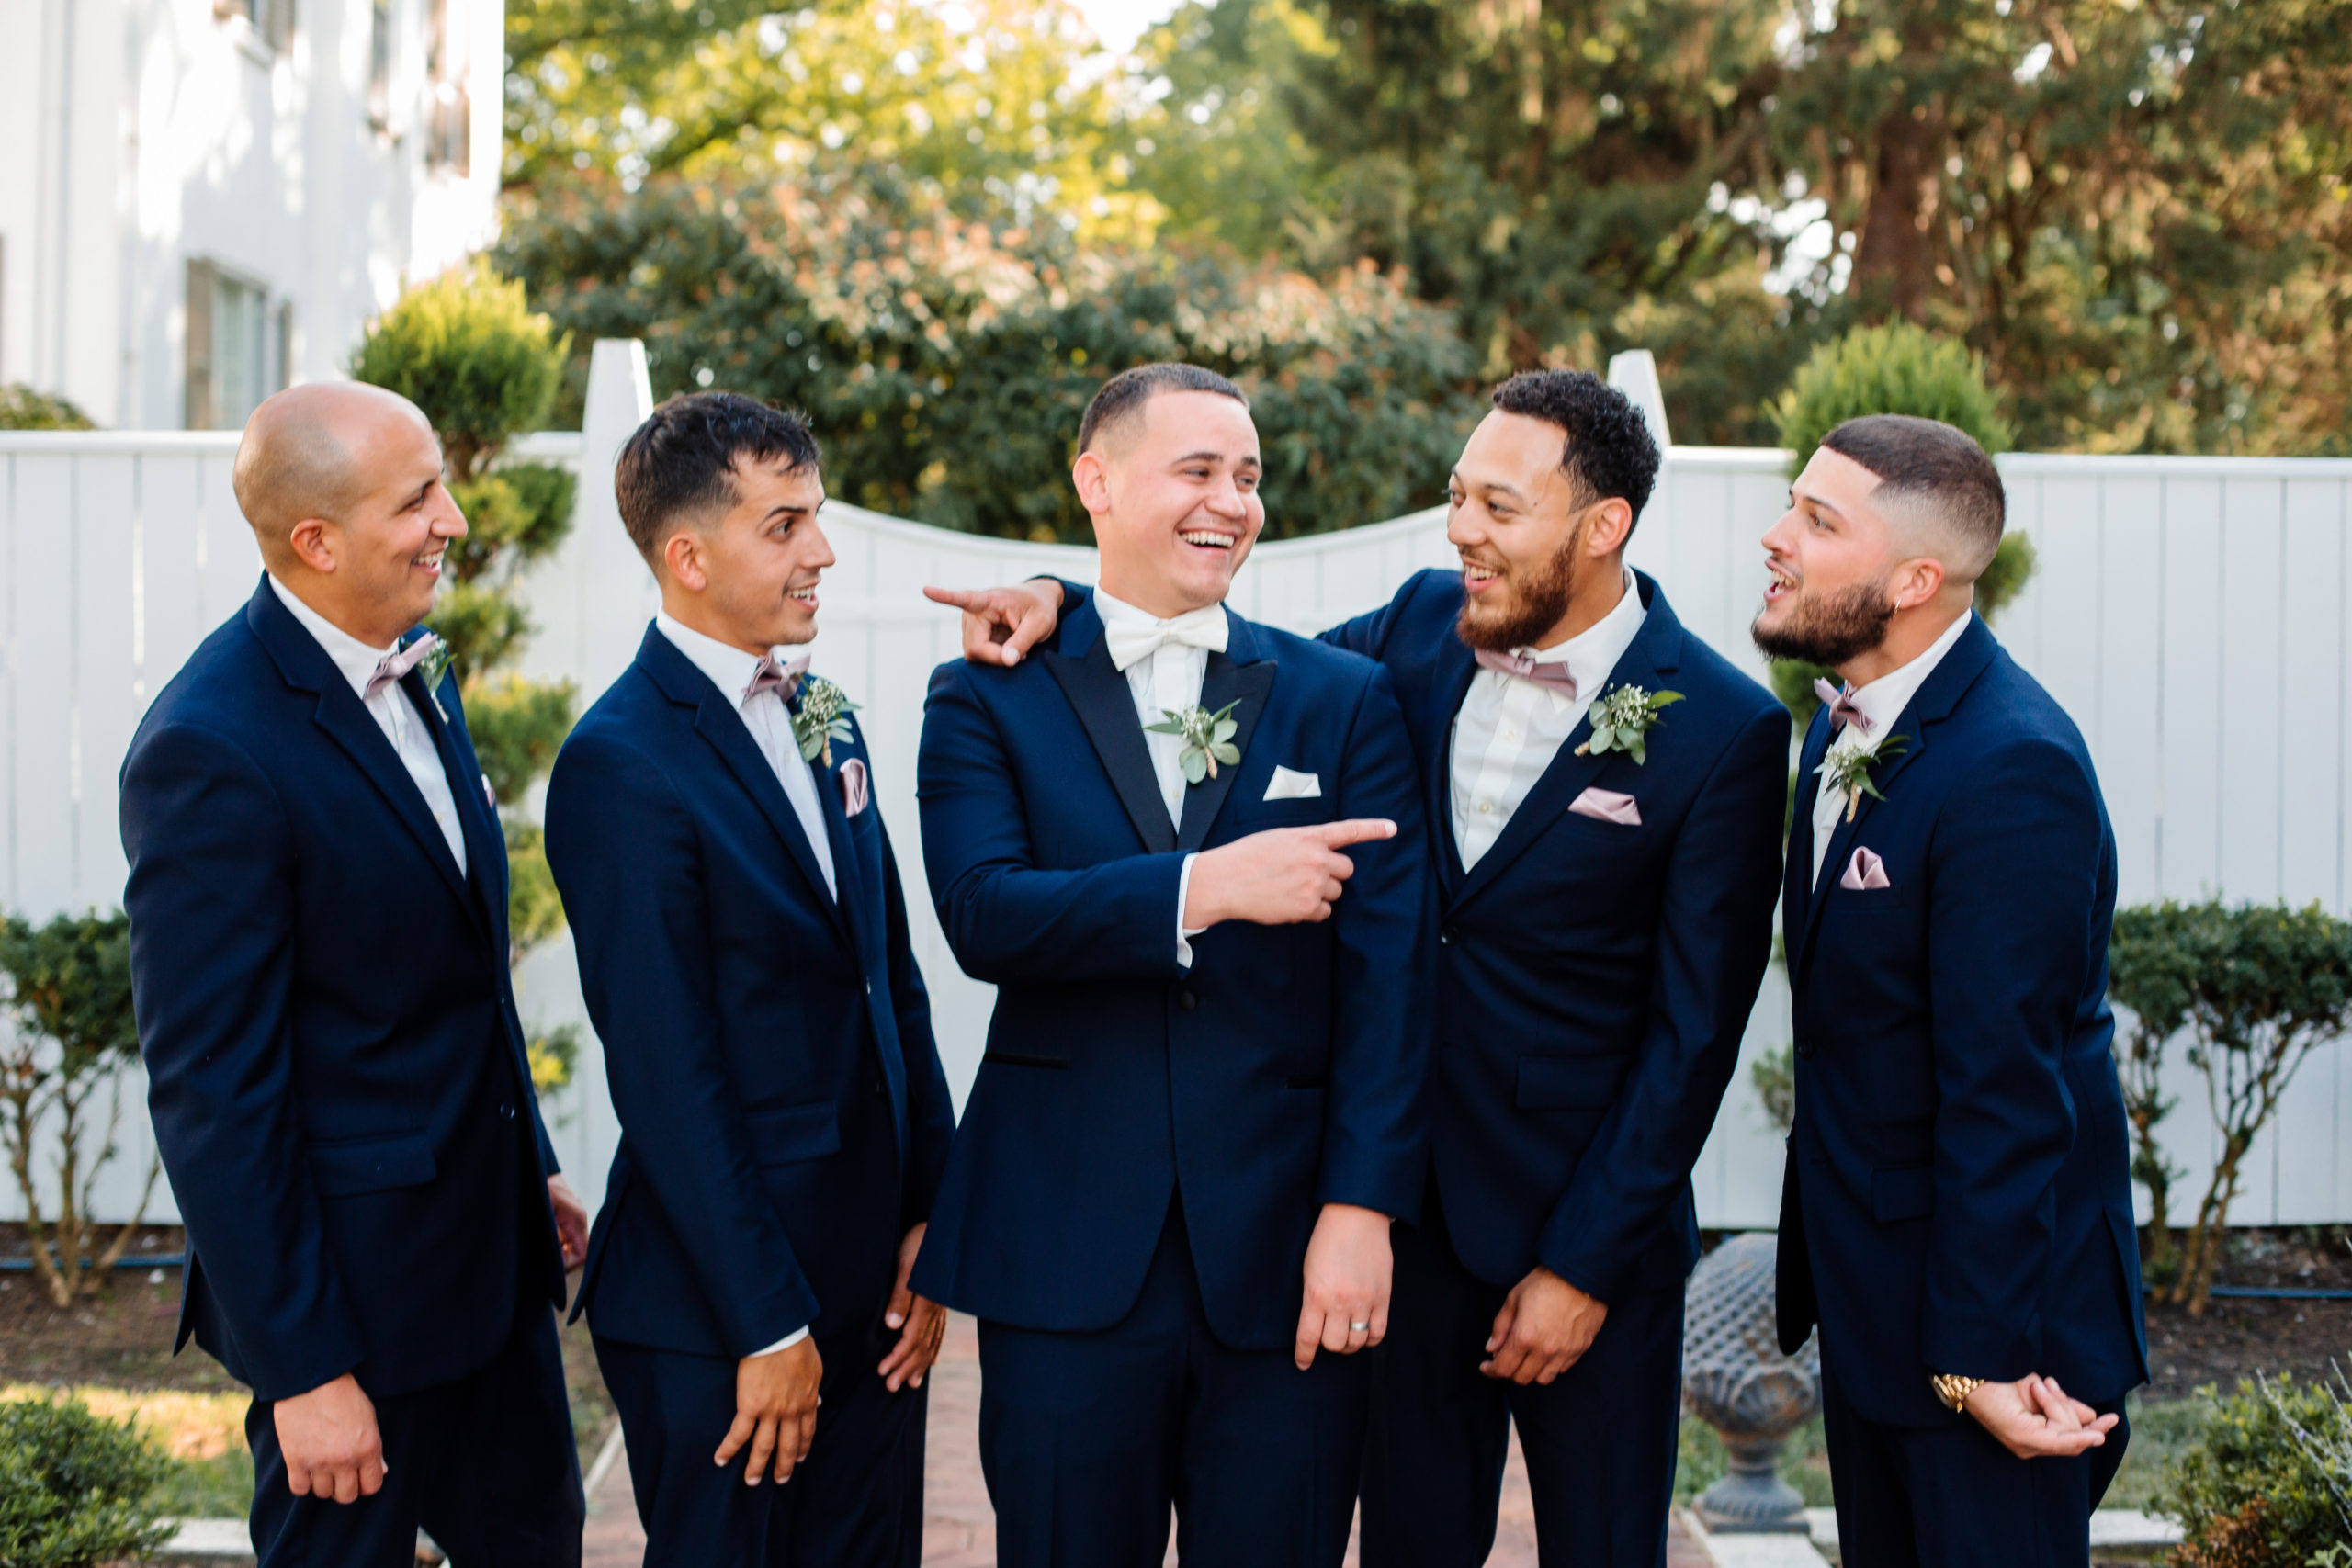 groom pointing towards one of his groomsman with other groomsmen standing around him